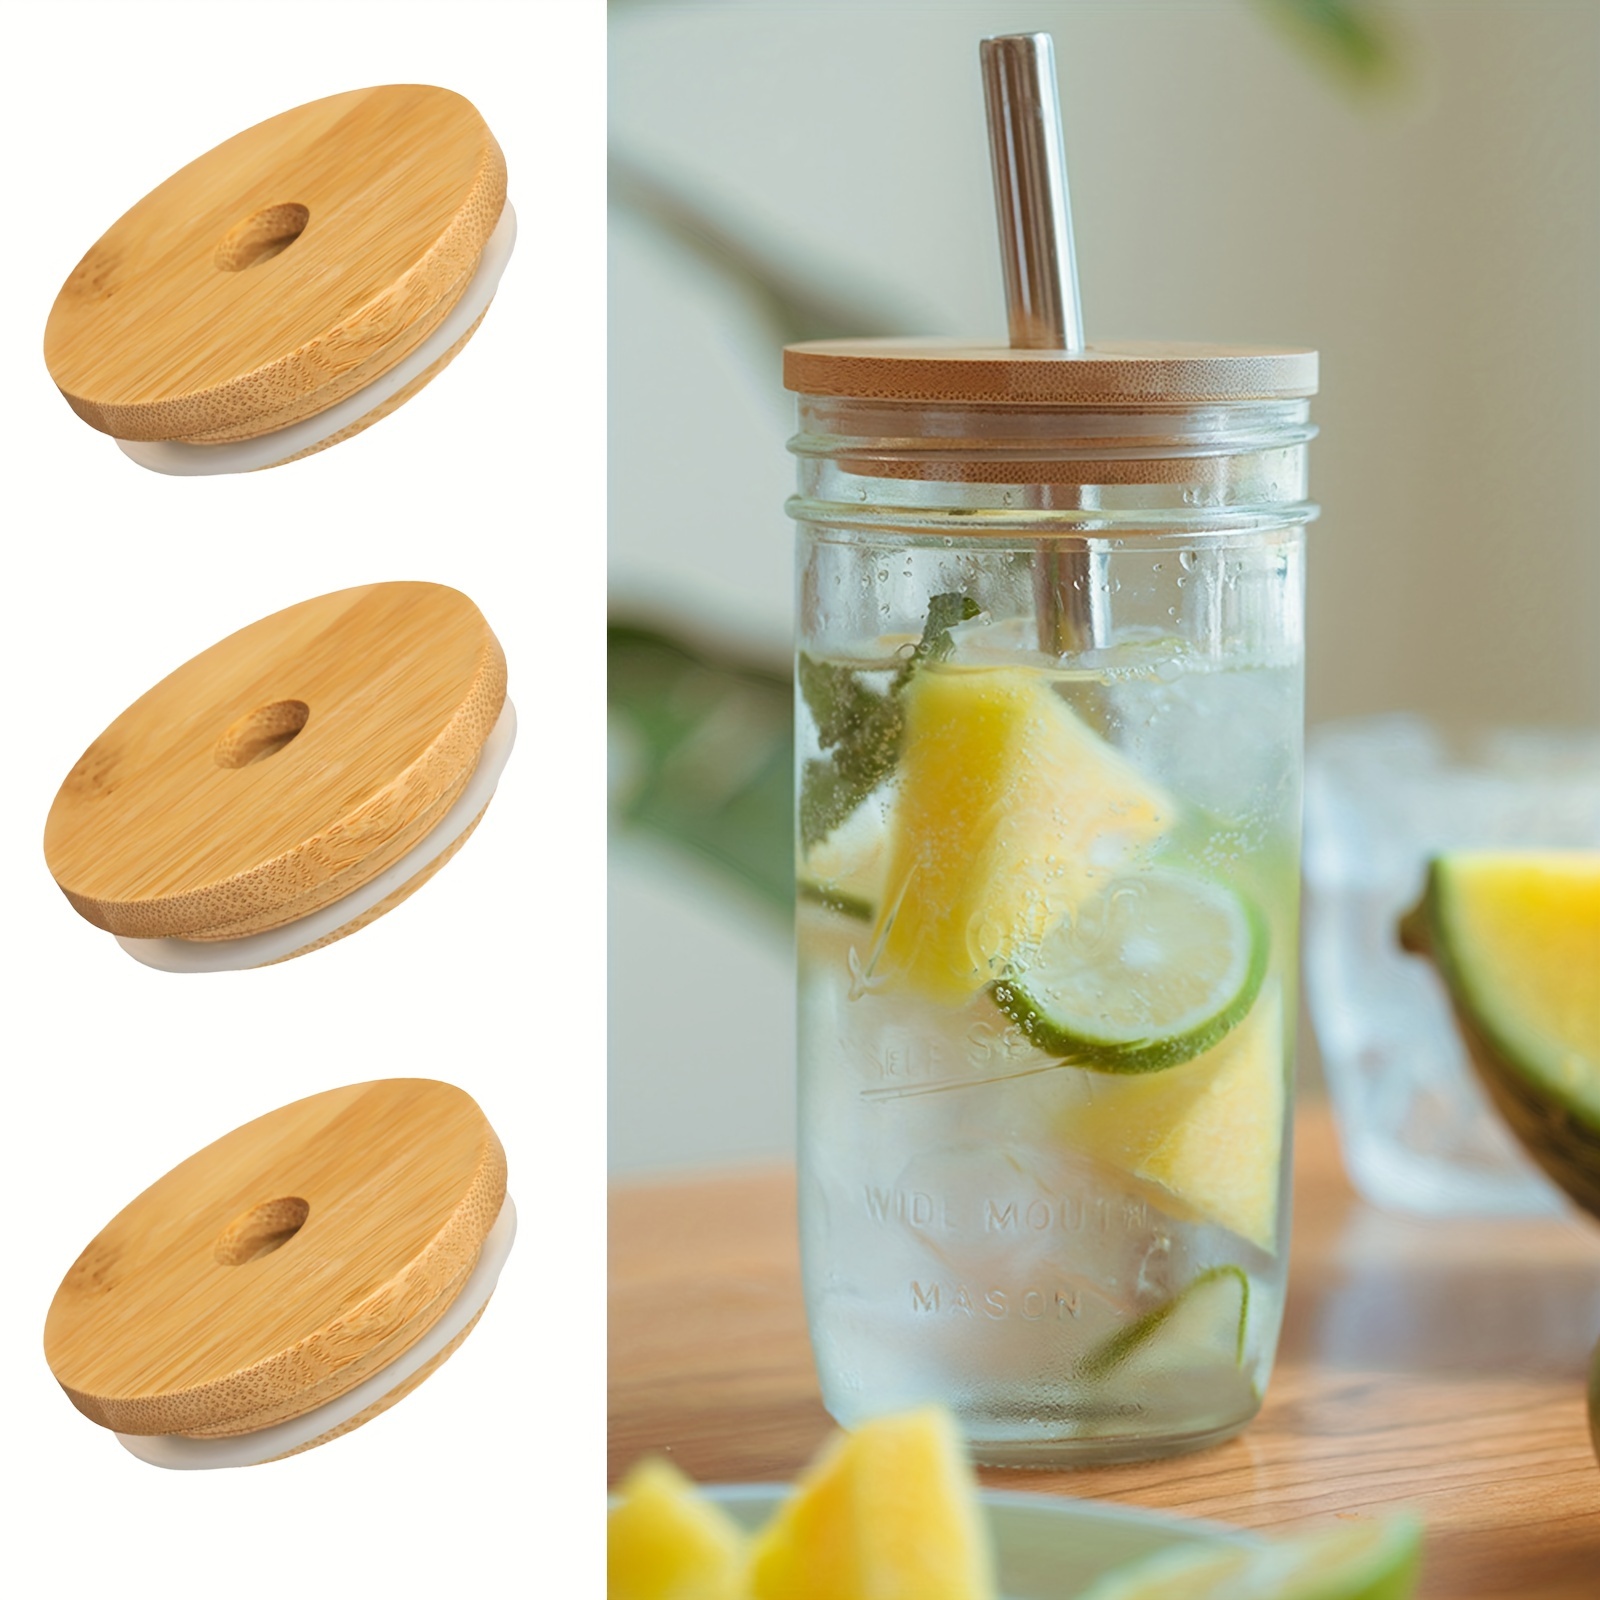 Reusable Bamboo Jar Lids 70MM Bamboo Jar Lids with Straw Hole for